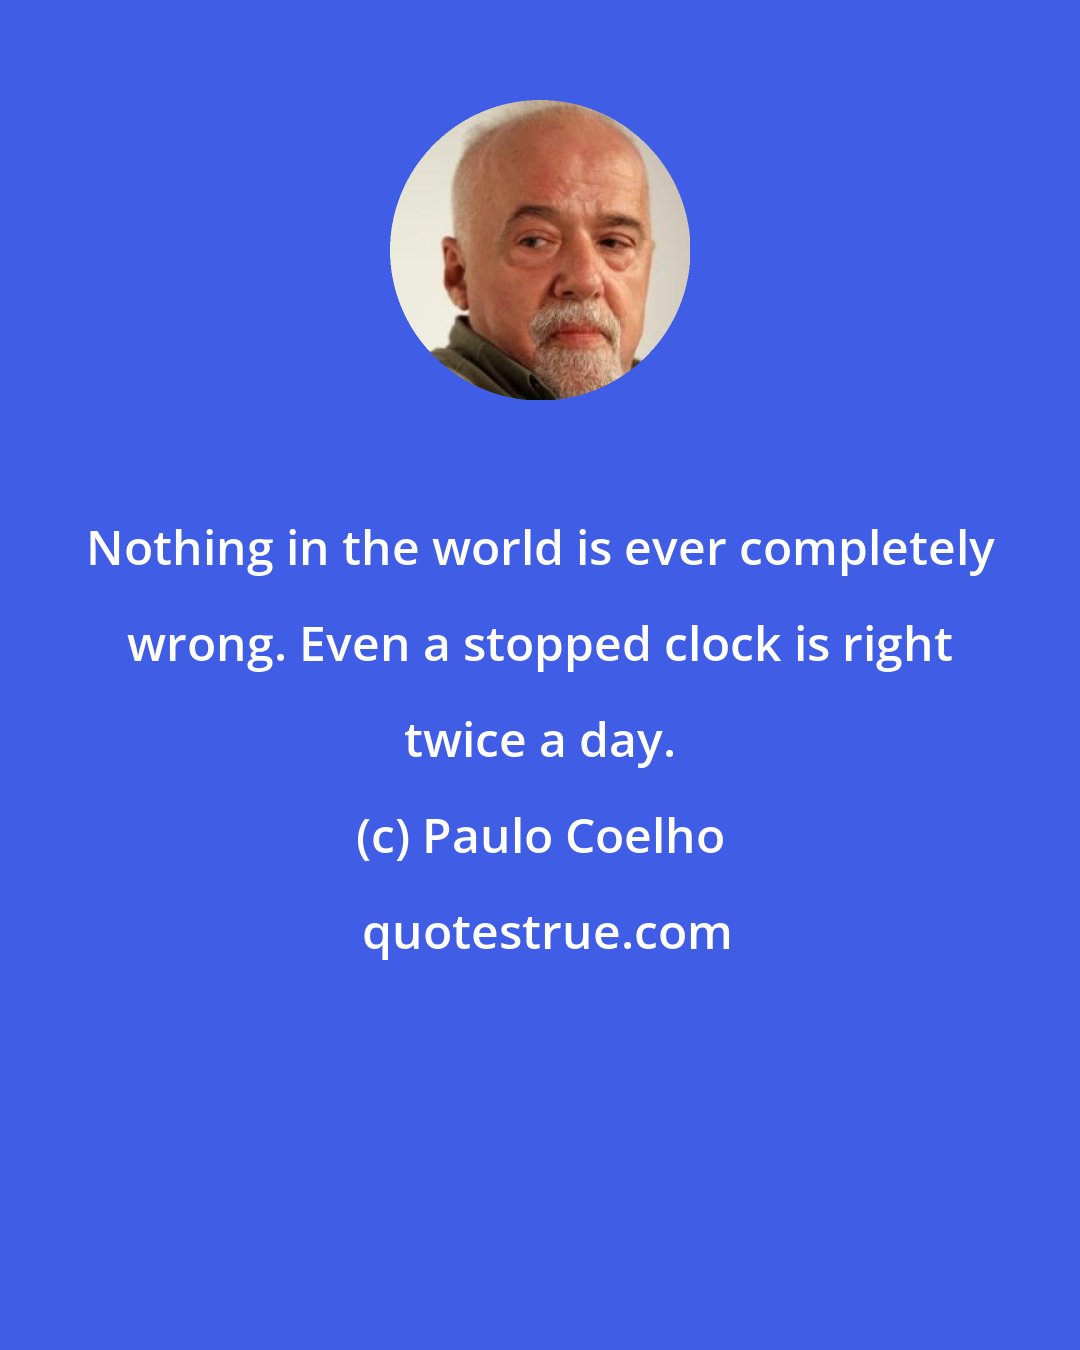 Paulo Coelho: Nothing in the world is ever completely wrong. Even a stopped clock is right twice a day.